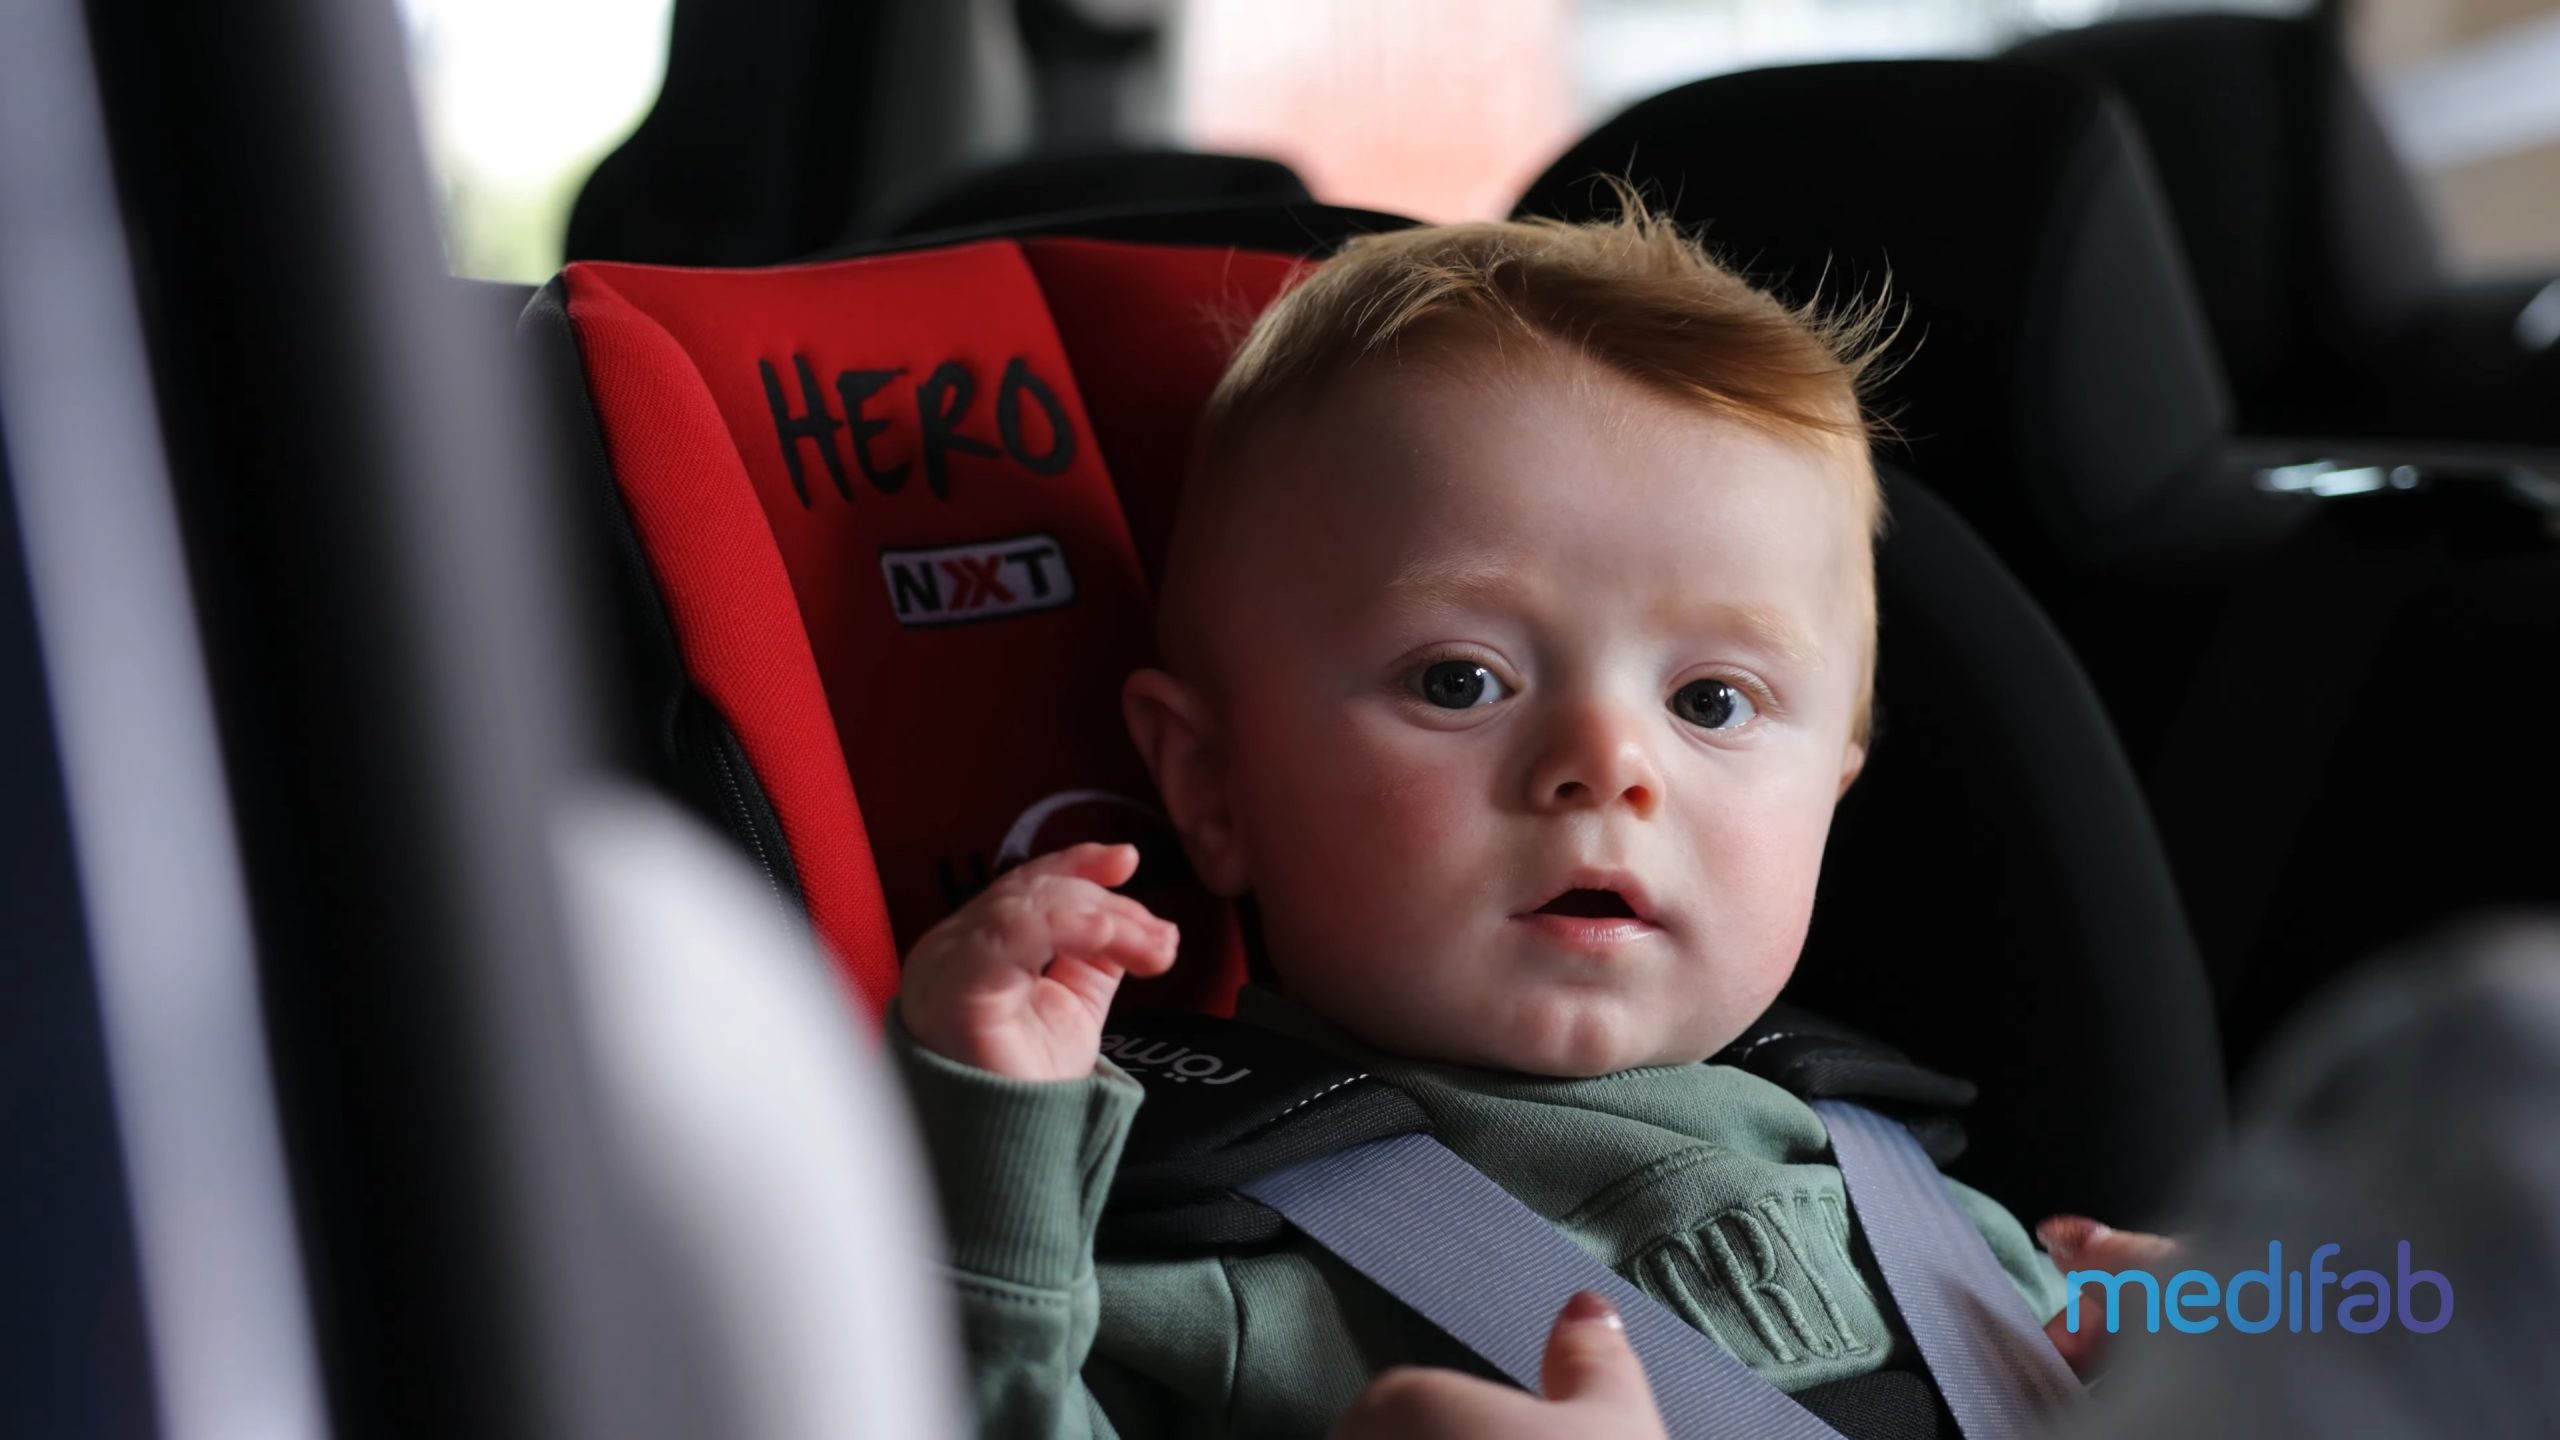 Hero NXT Car Seat Introduction video